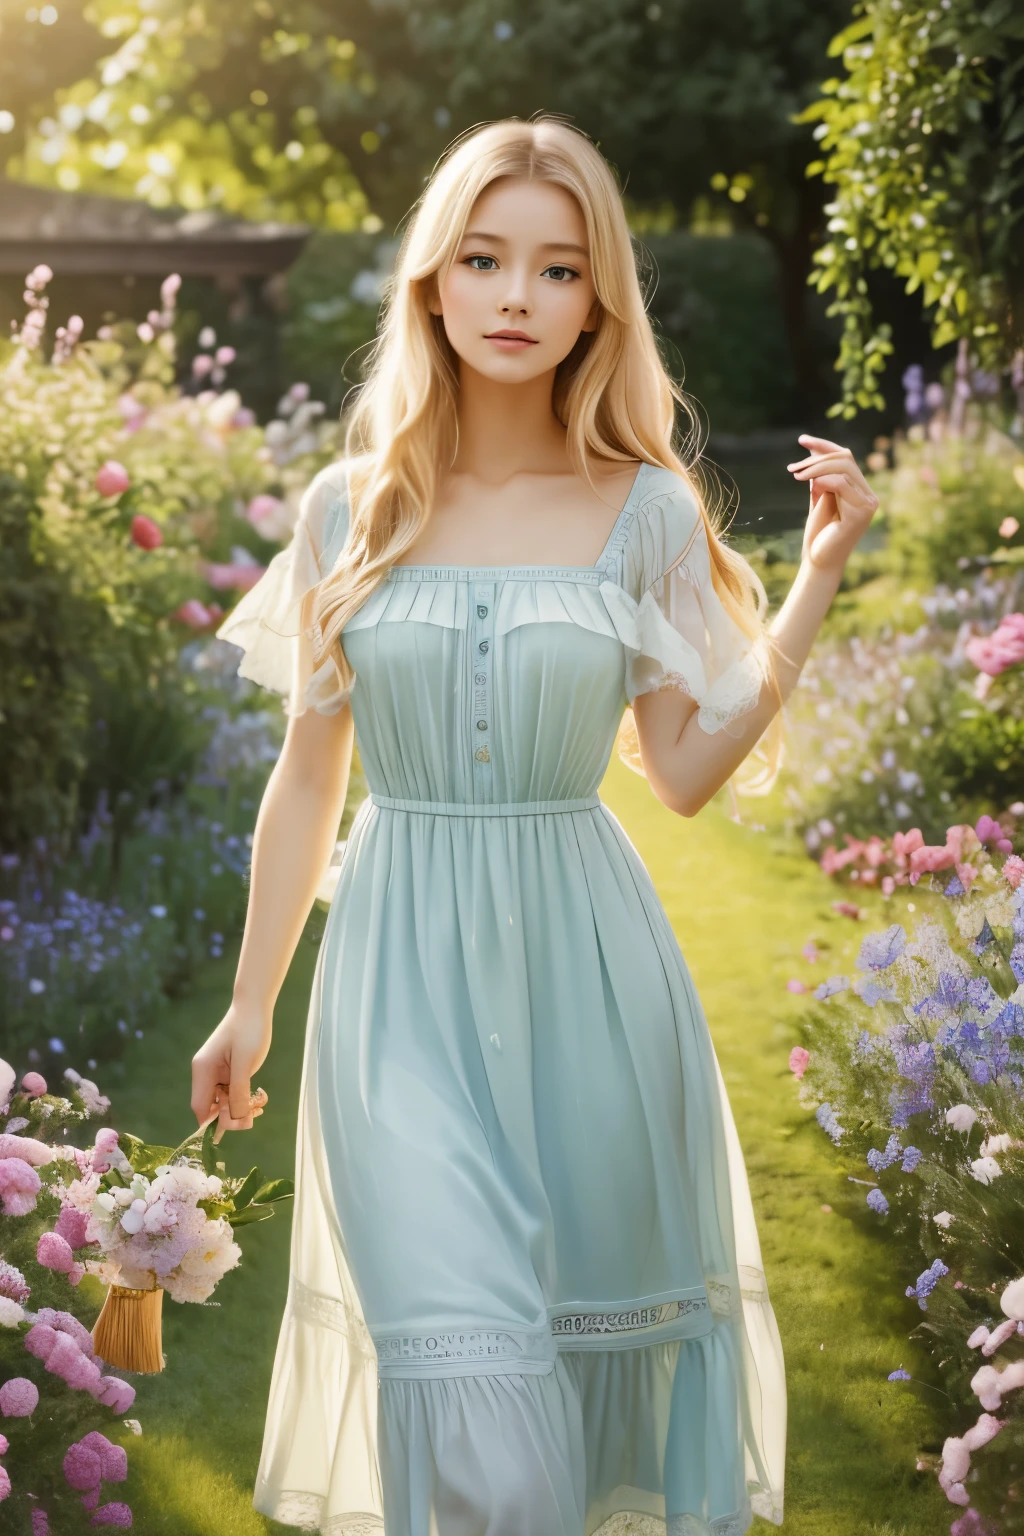 Girl with flowing blond hair and charming blue eyes, Wearing a white dress of grace, Standing in the middle of a vibrant garden，Flowers blooming in the garden，Greenery. The sun gently illuminates her delicate features, Casts a soft glow on her flawless skin. She holds a delicate butterfly in her hand, The breeze swirled around her, Let the flowers dance. The scene was captured in a stunning oil painting, Every detail is carefully crafted，Create a masterpiece. Bright and vivid colors, With a hint of ethereal soft tones, Gives artwork a dreamlike quality. Lighting is soft and diffuse, Create a peaceful and peaceful atmosphere. High-resolution images showcase the artist&#39;s impeccable skills, Capture every intricate detail with precision. The overall atmosphere exudes a sense of beauty, grace, and enchantment. the artwork is reminiscent of classical portraiture, With a touch of fantasy and whimsy, Evoke emotions of wonder and awe.